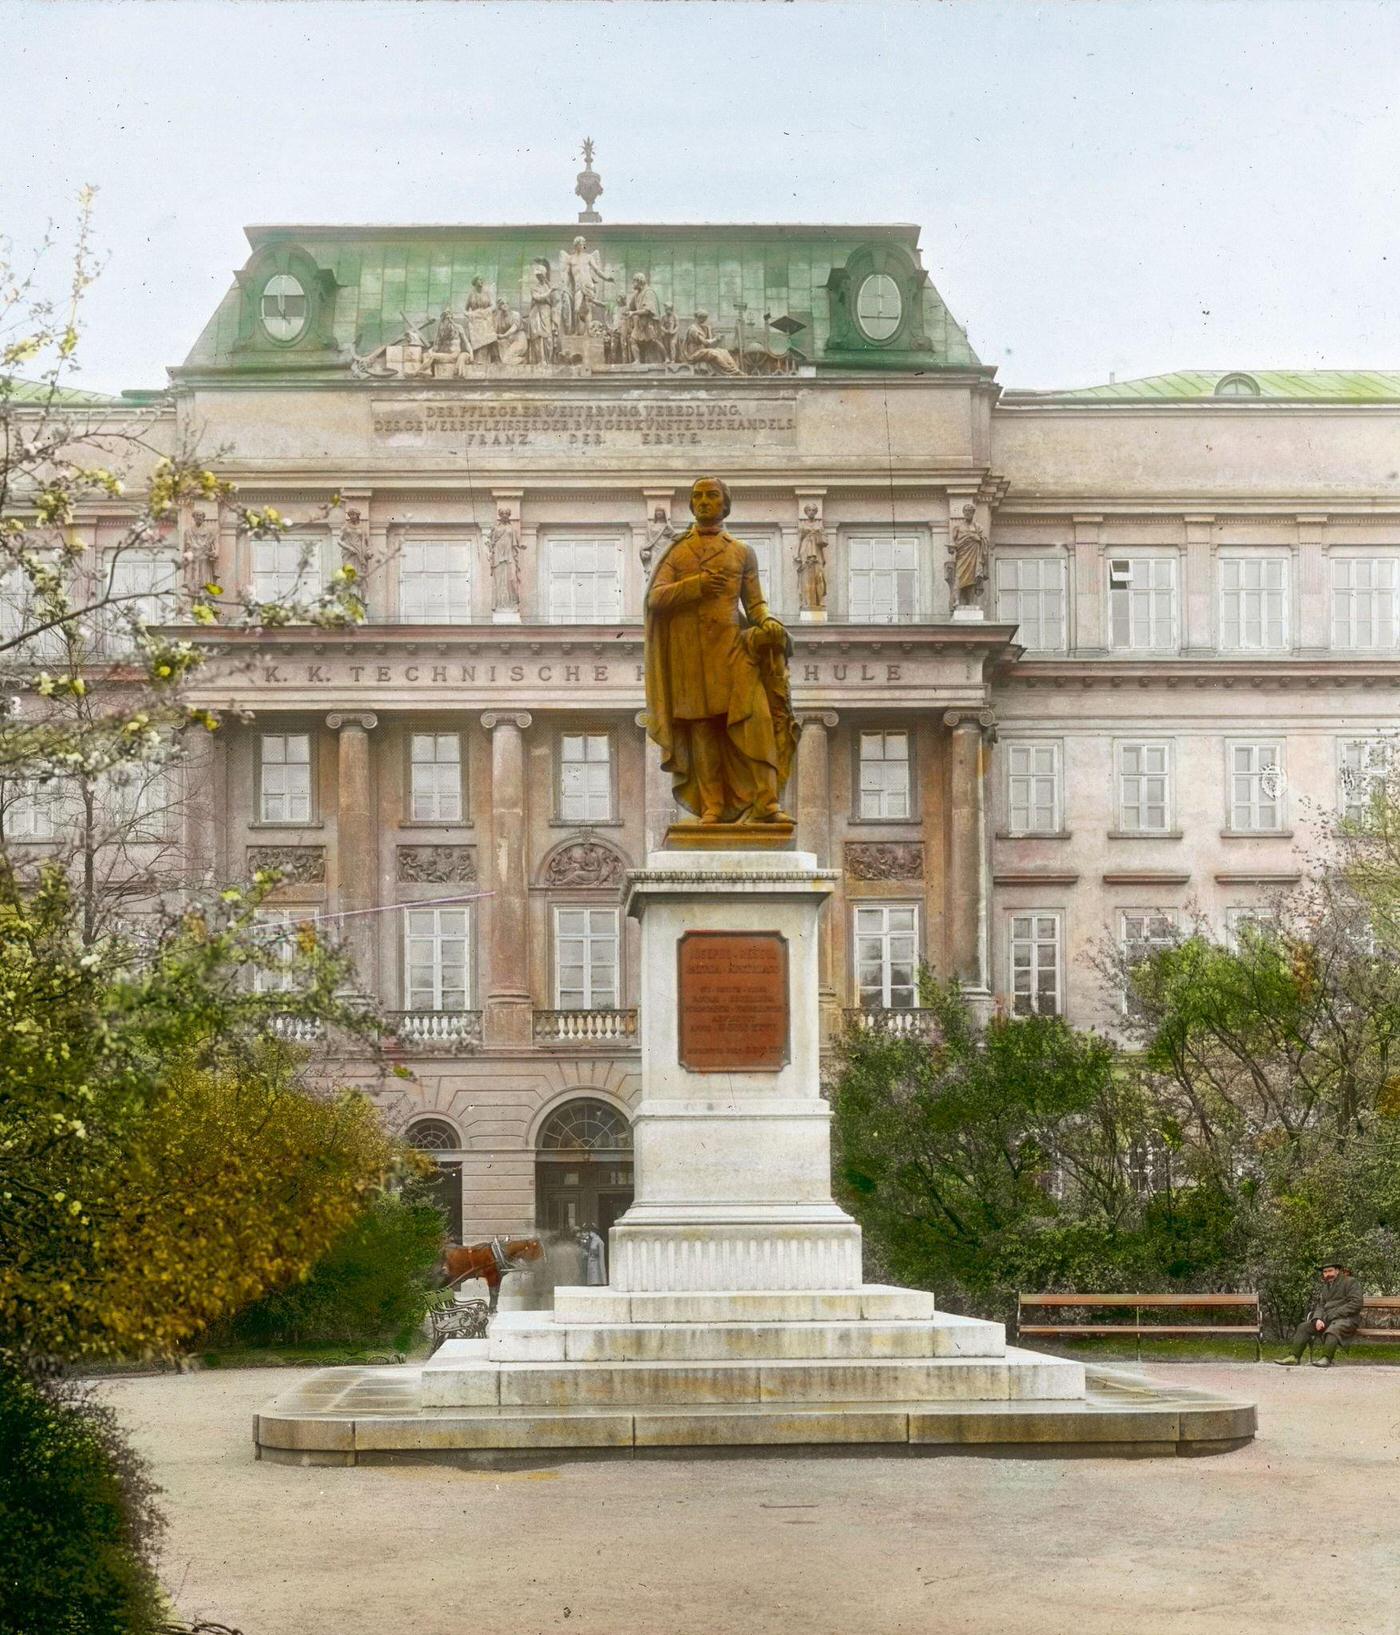 Monument of Josef Ressel in Ressel Park at Karlsplatz, with the technical college of Vienna in the background. Vienna, 4th district, 1900.